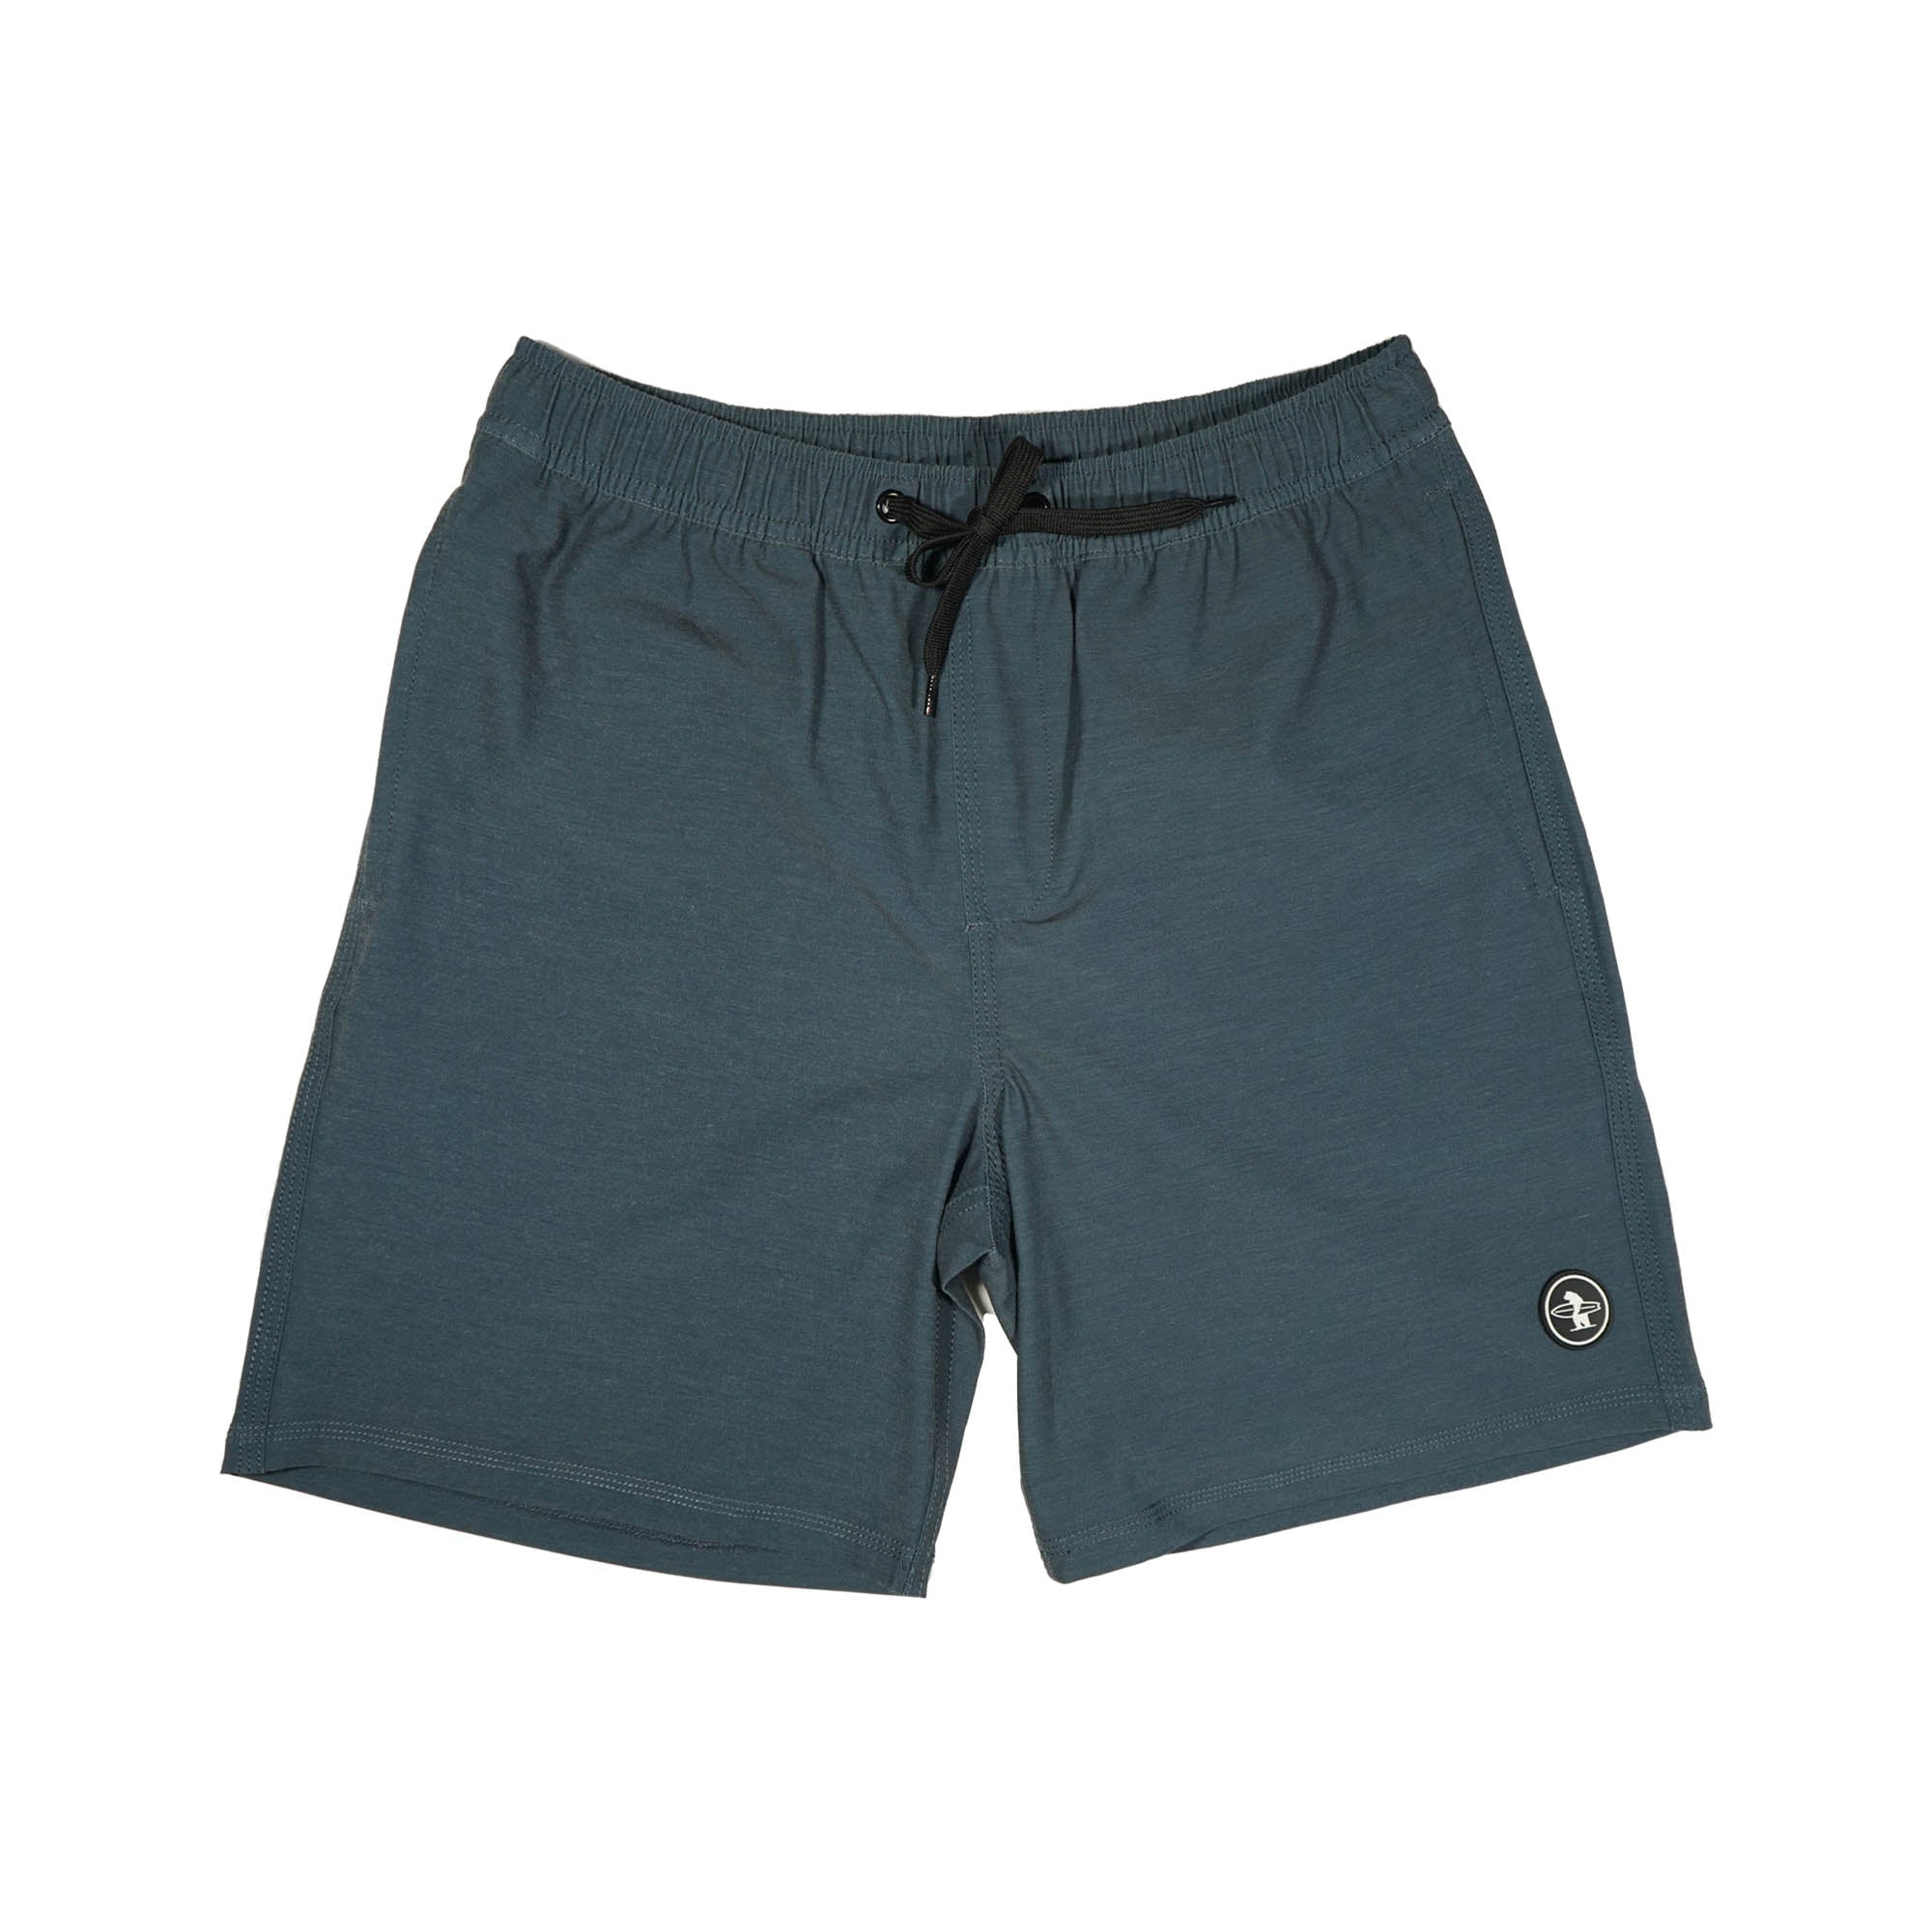 Repreve Recycled Boardshorts